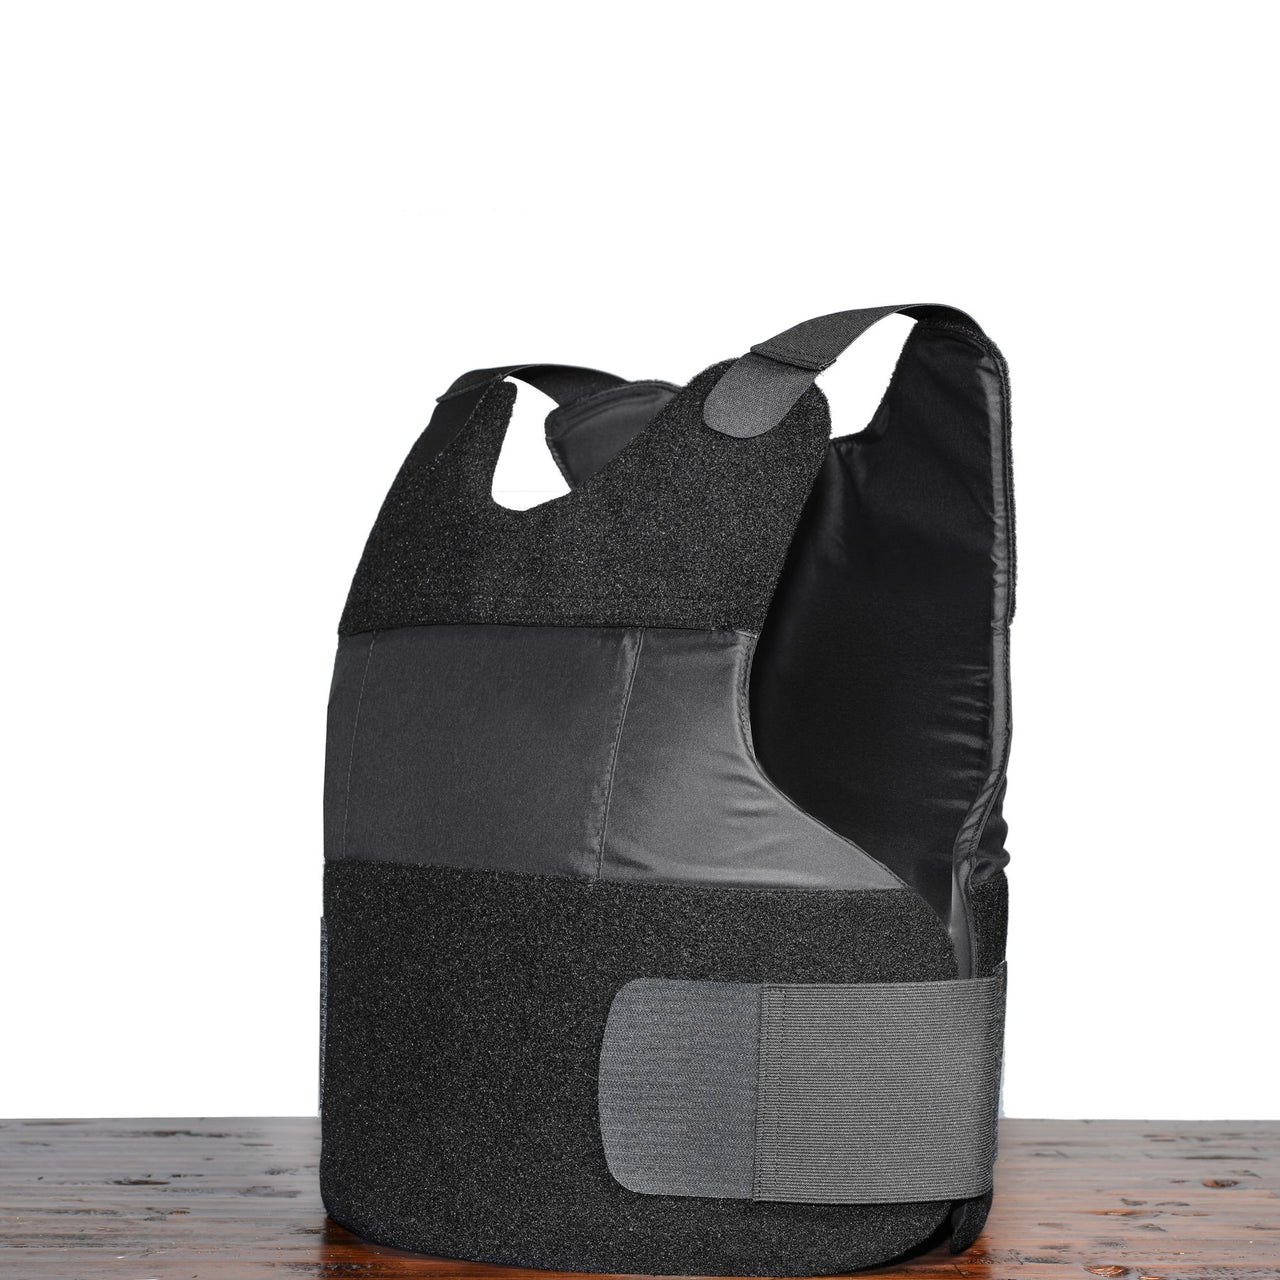 A Body Armor Direct Freedom Concealable Carrier vest in grey and black on top of a wooden table.